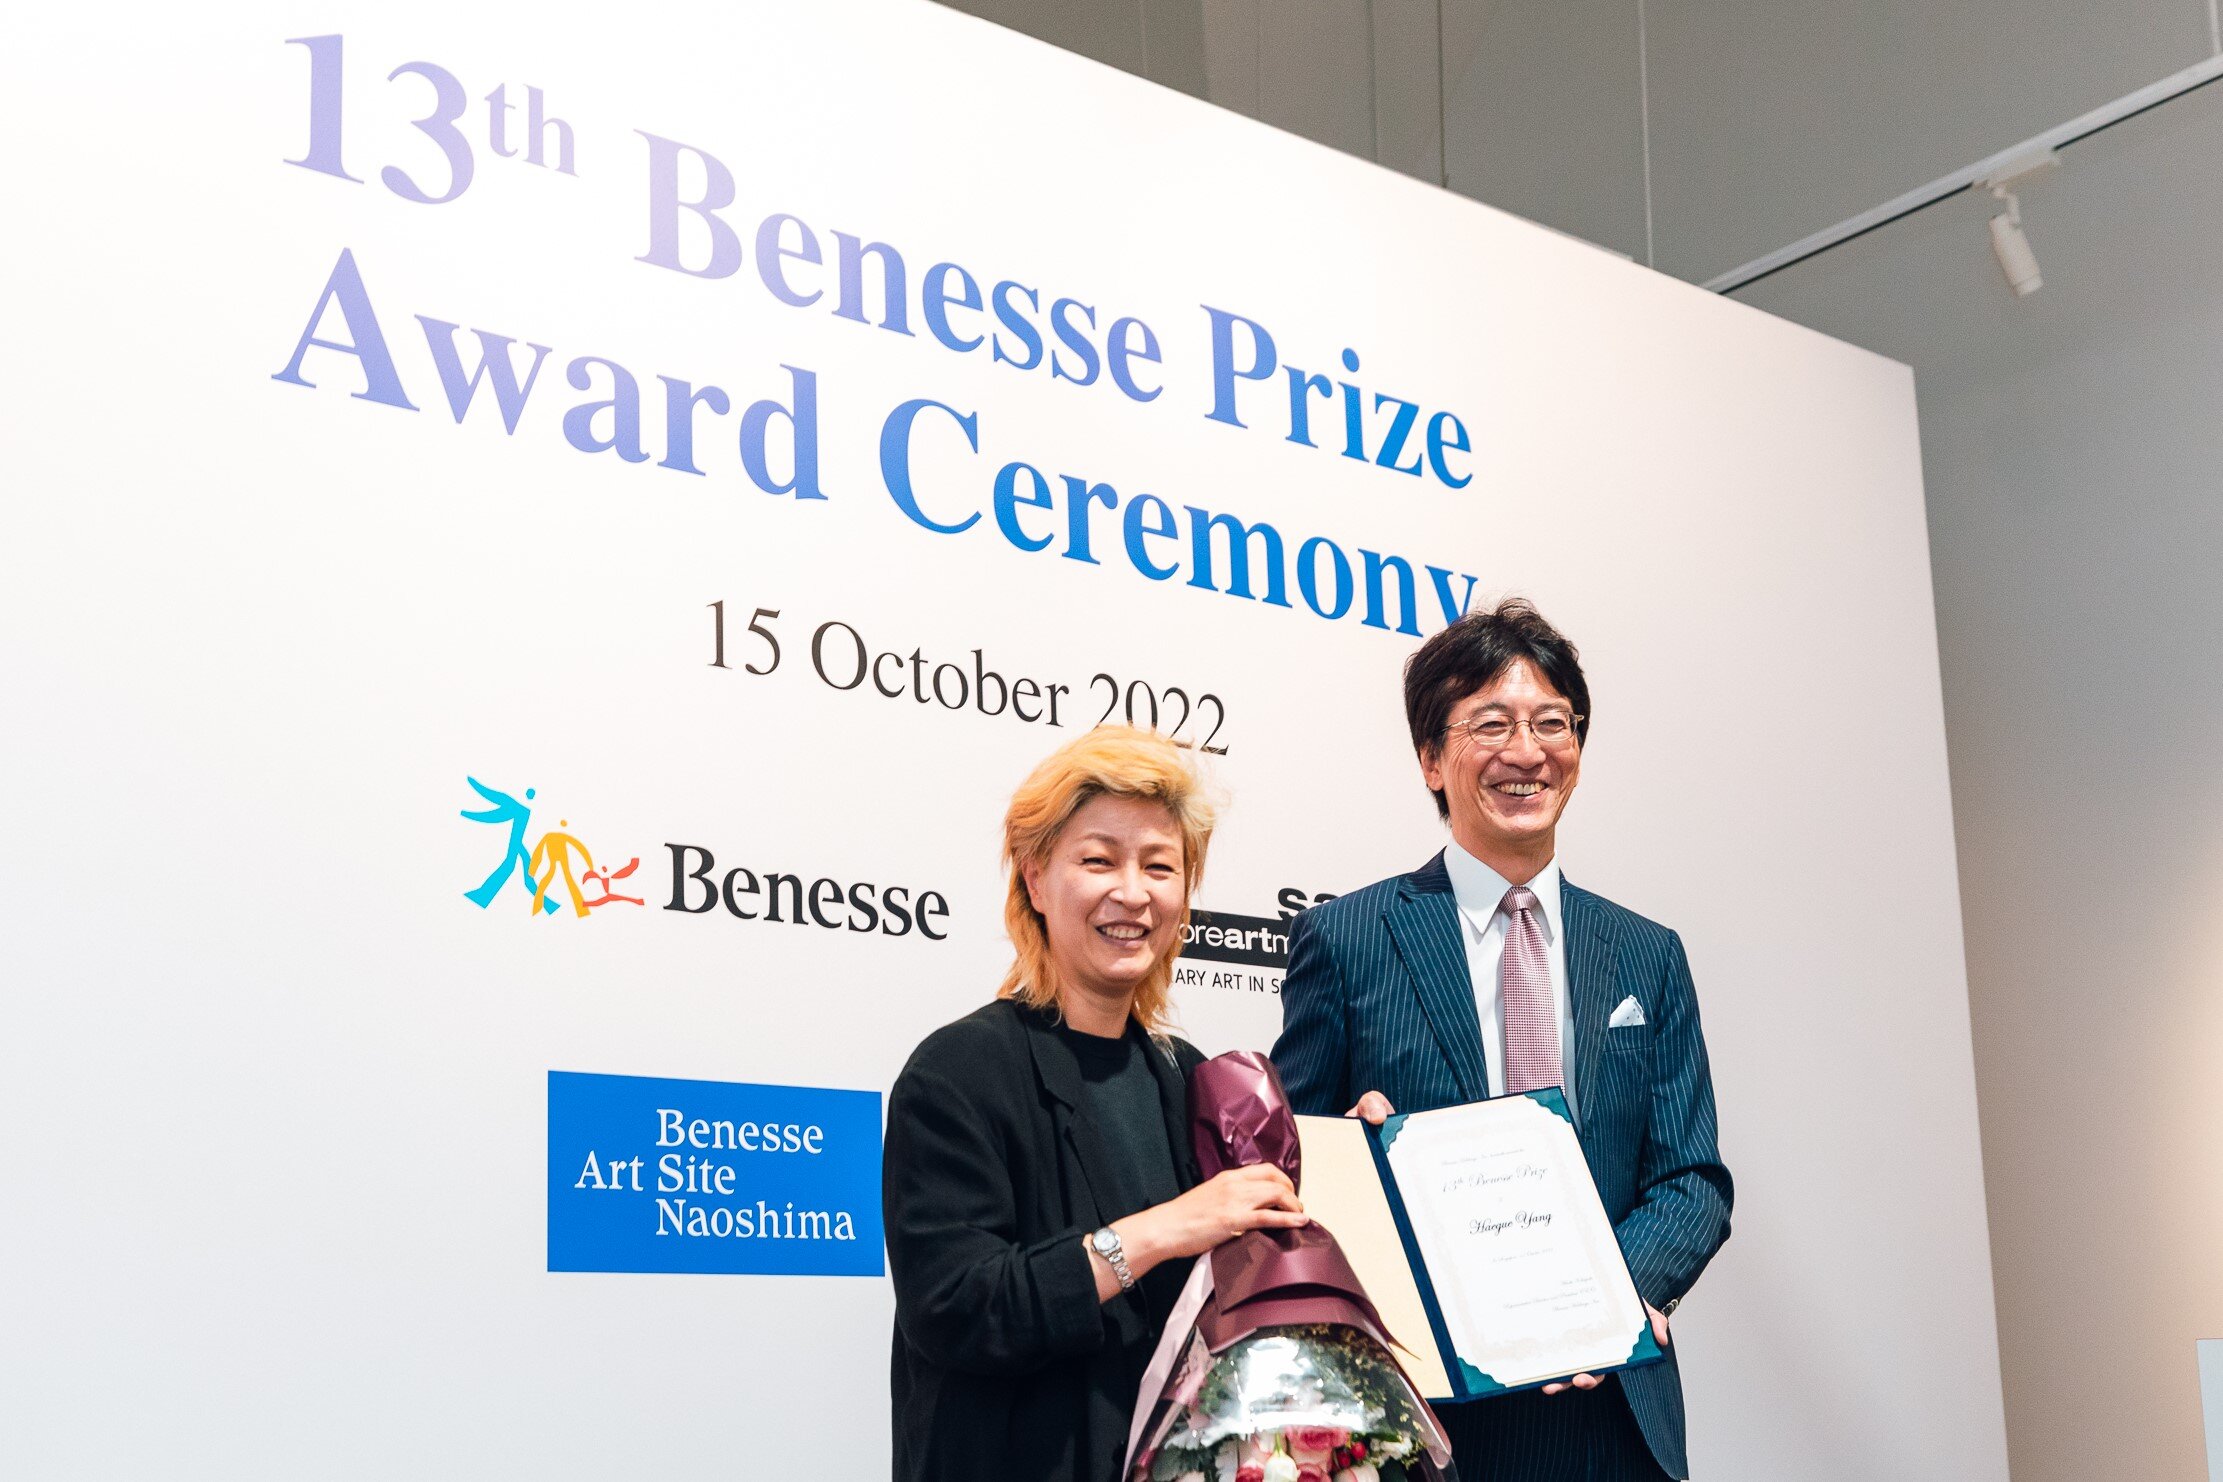 The13thBenessePrizeAwarded